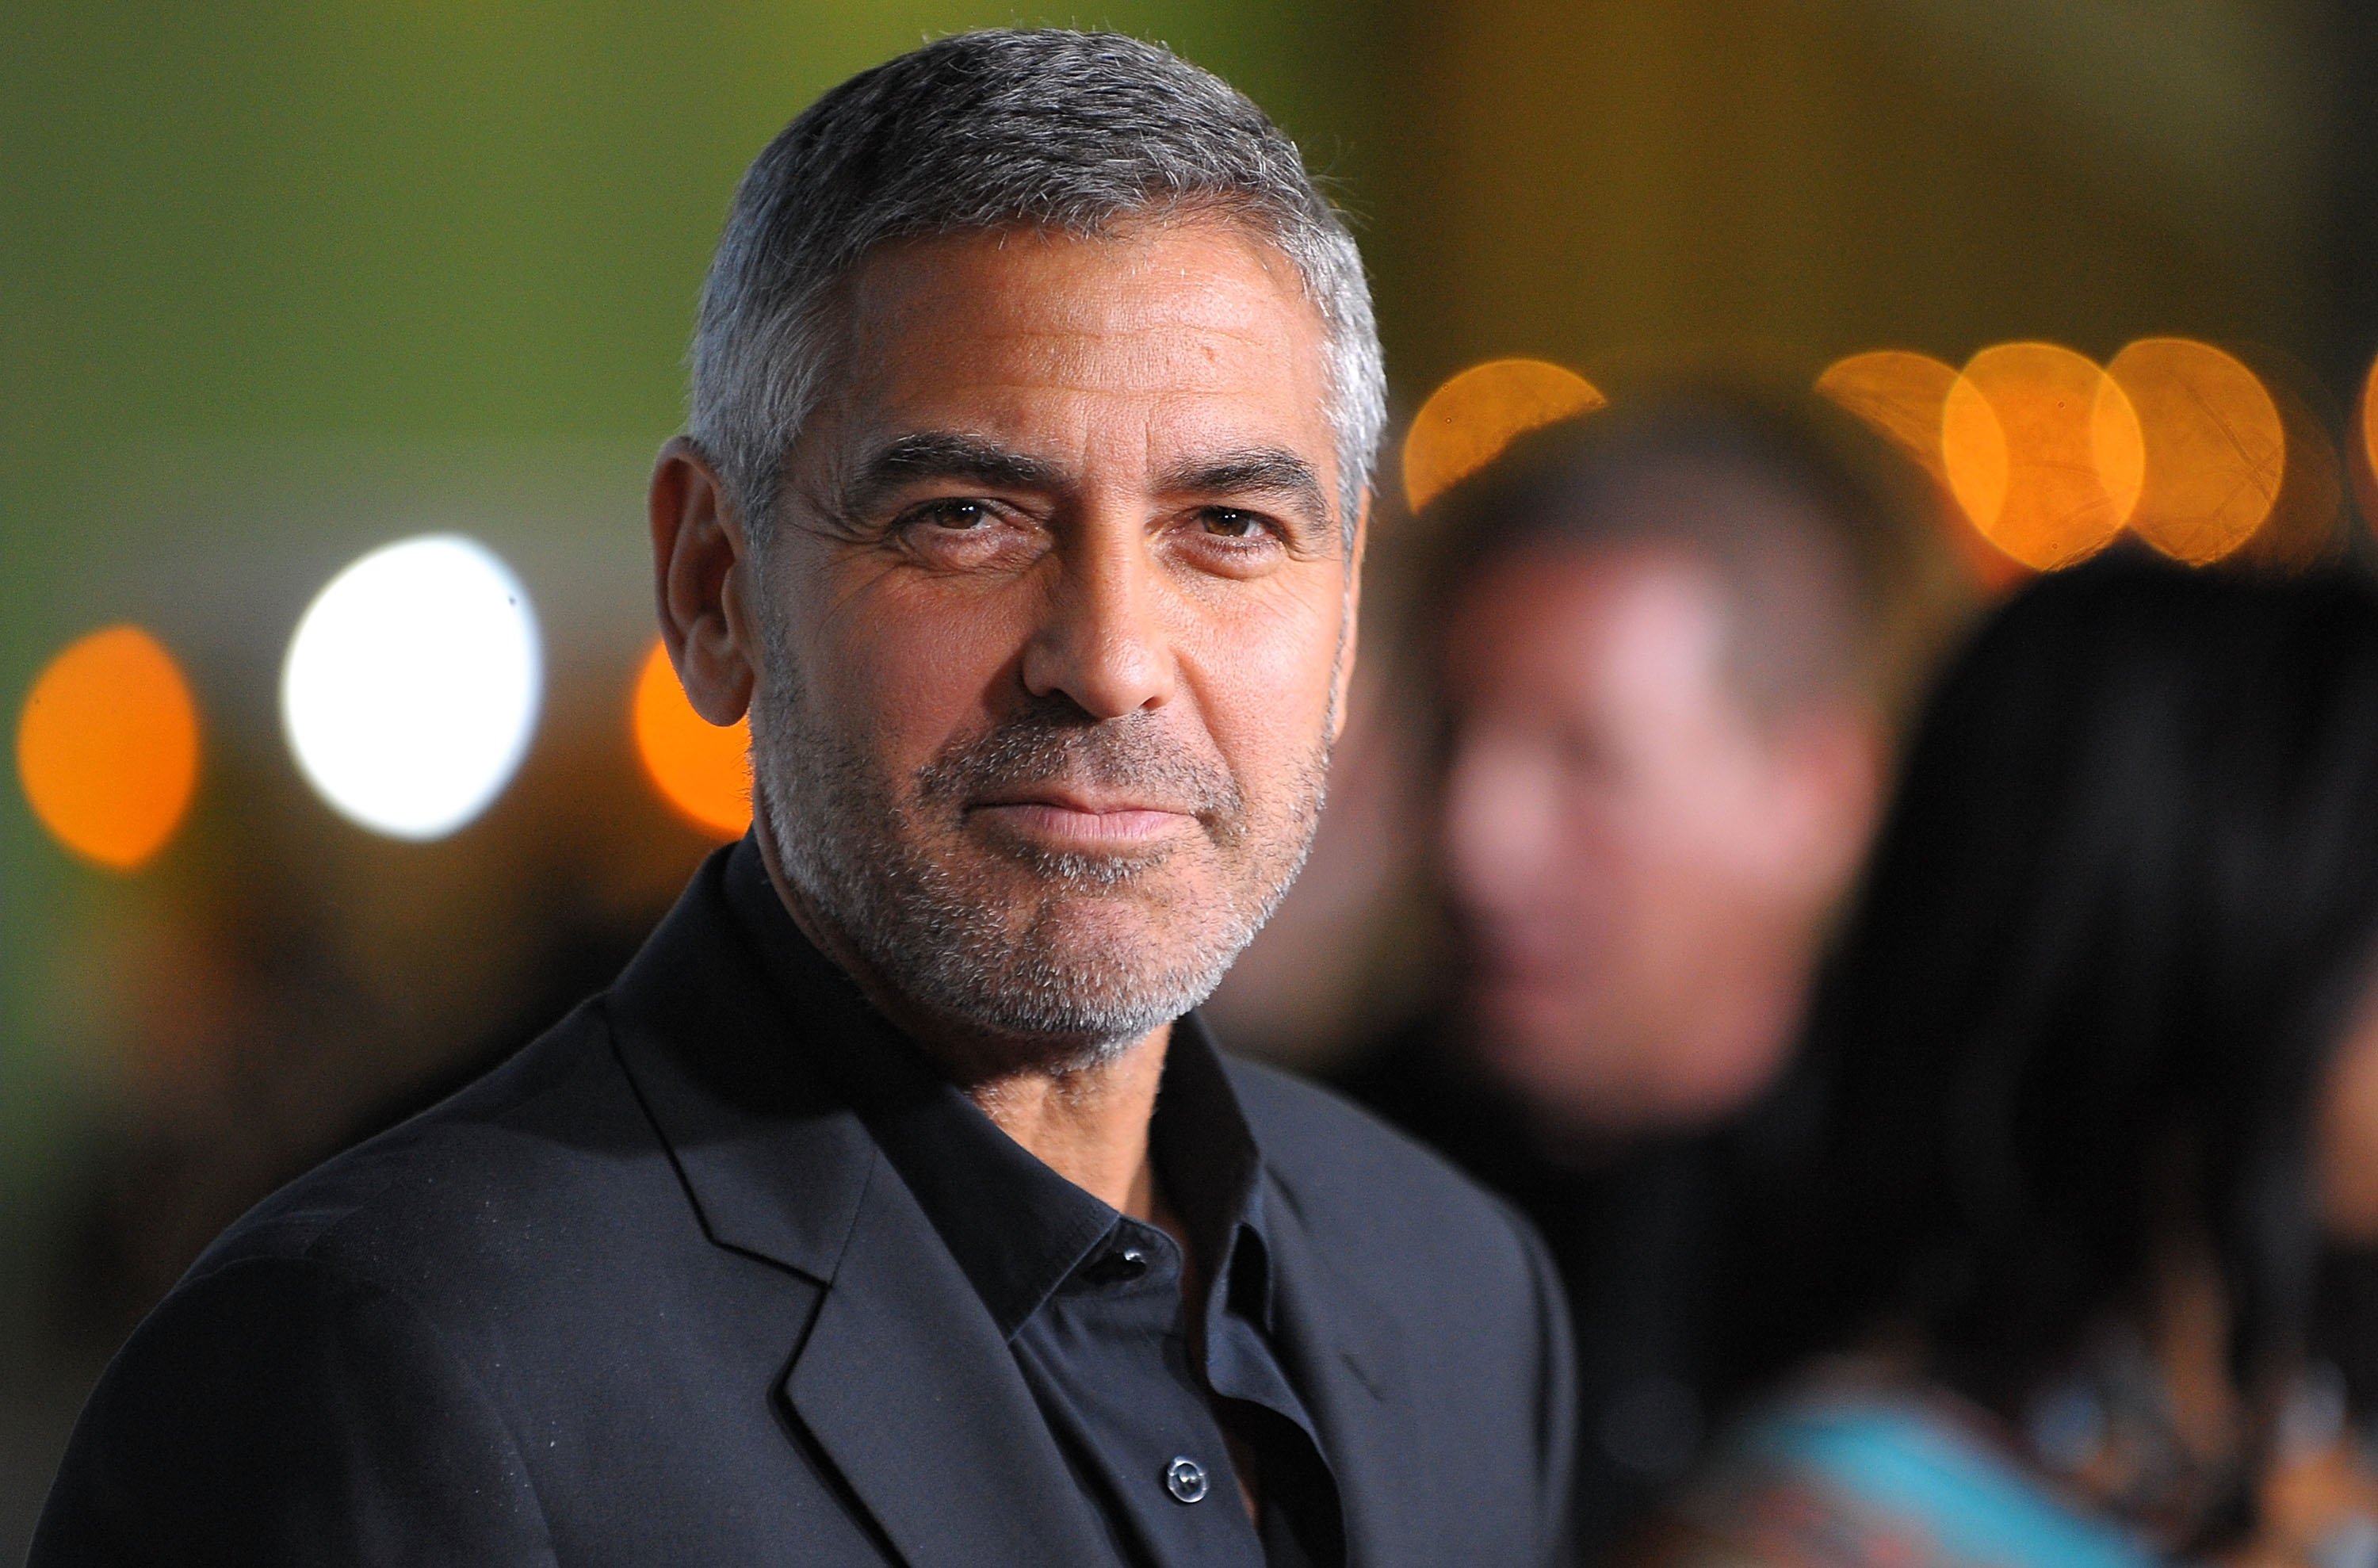 George Clooney at the premiere of Paramount Pictures' "Up In The Air" at Mann Village Theatre on November 30, 2009, in Westwood, California | Source: Getty Images